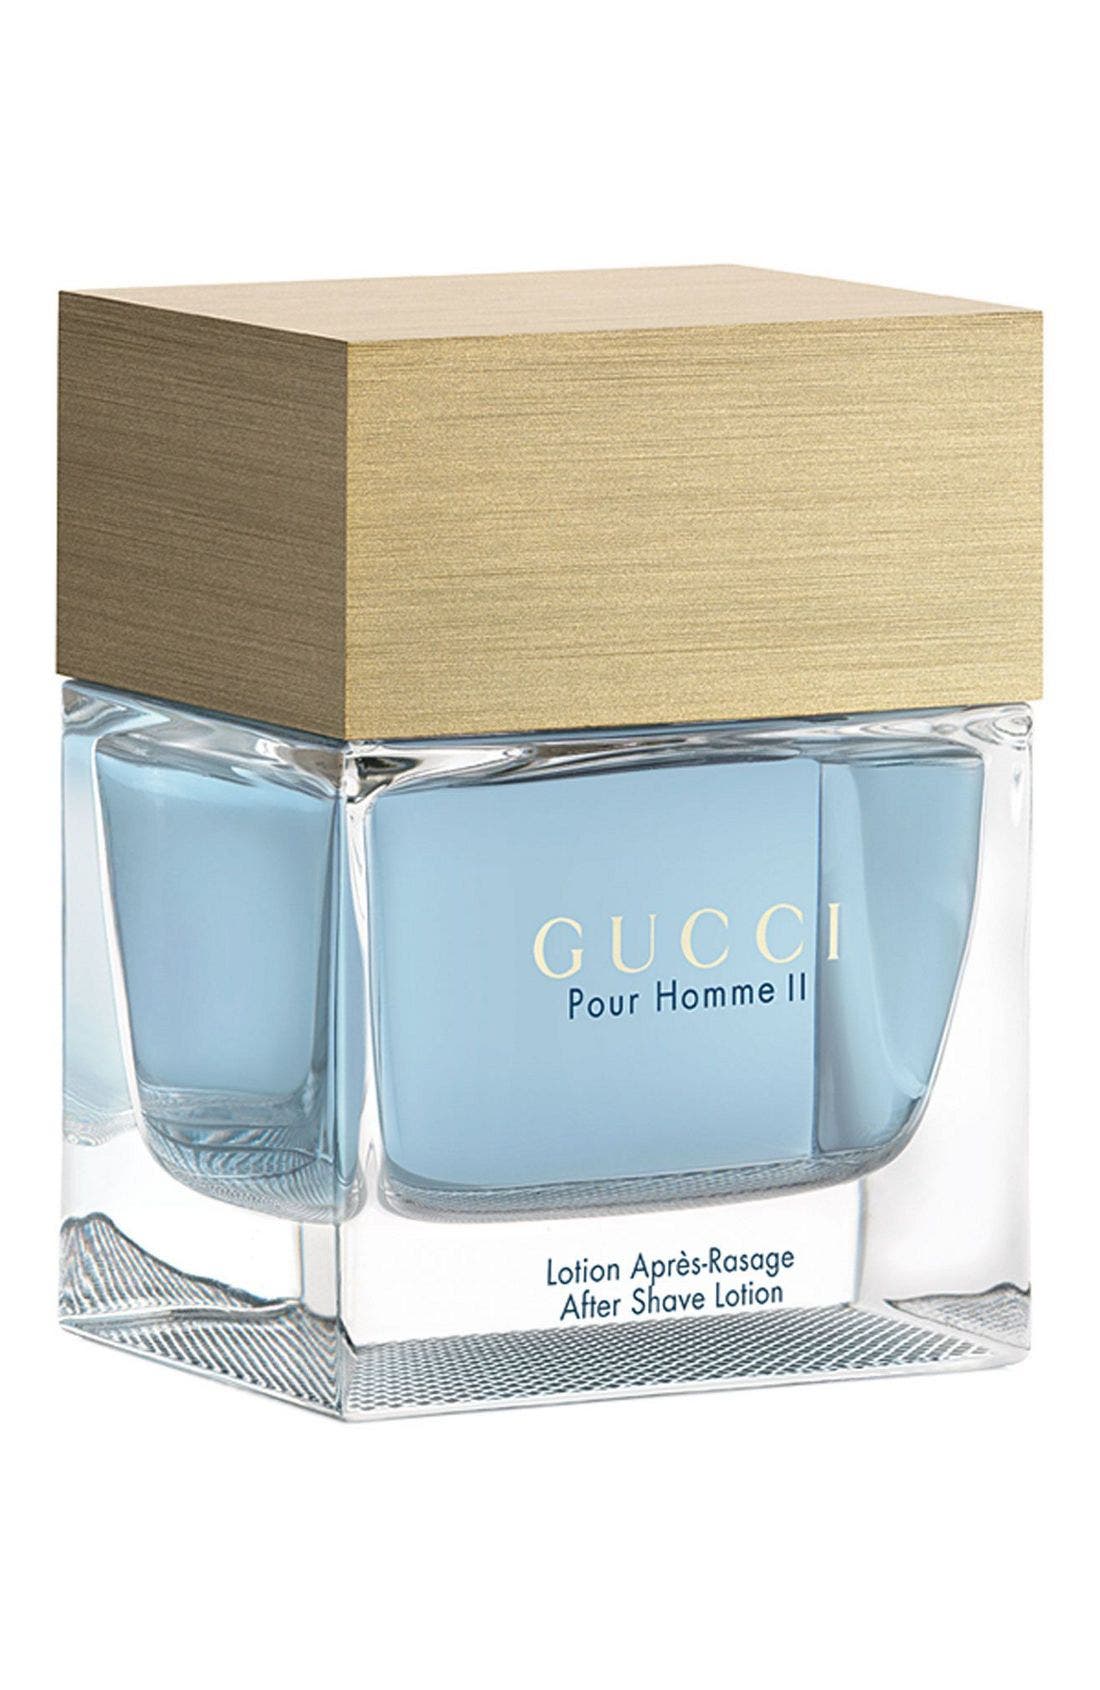 gucci pour homme ii by gucci